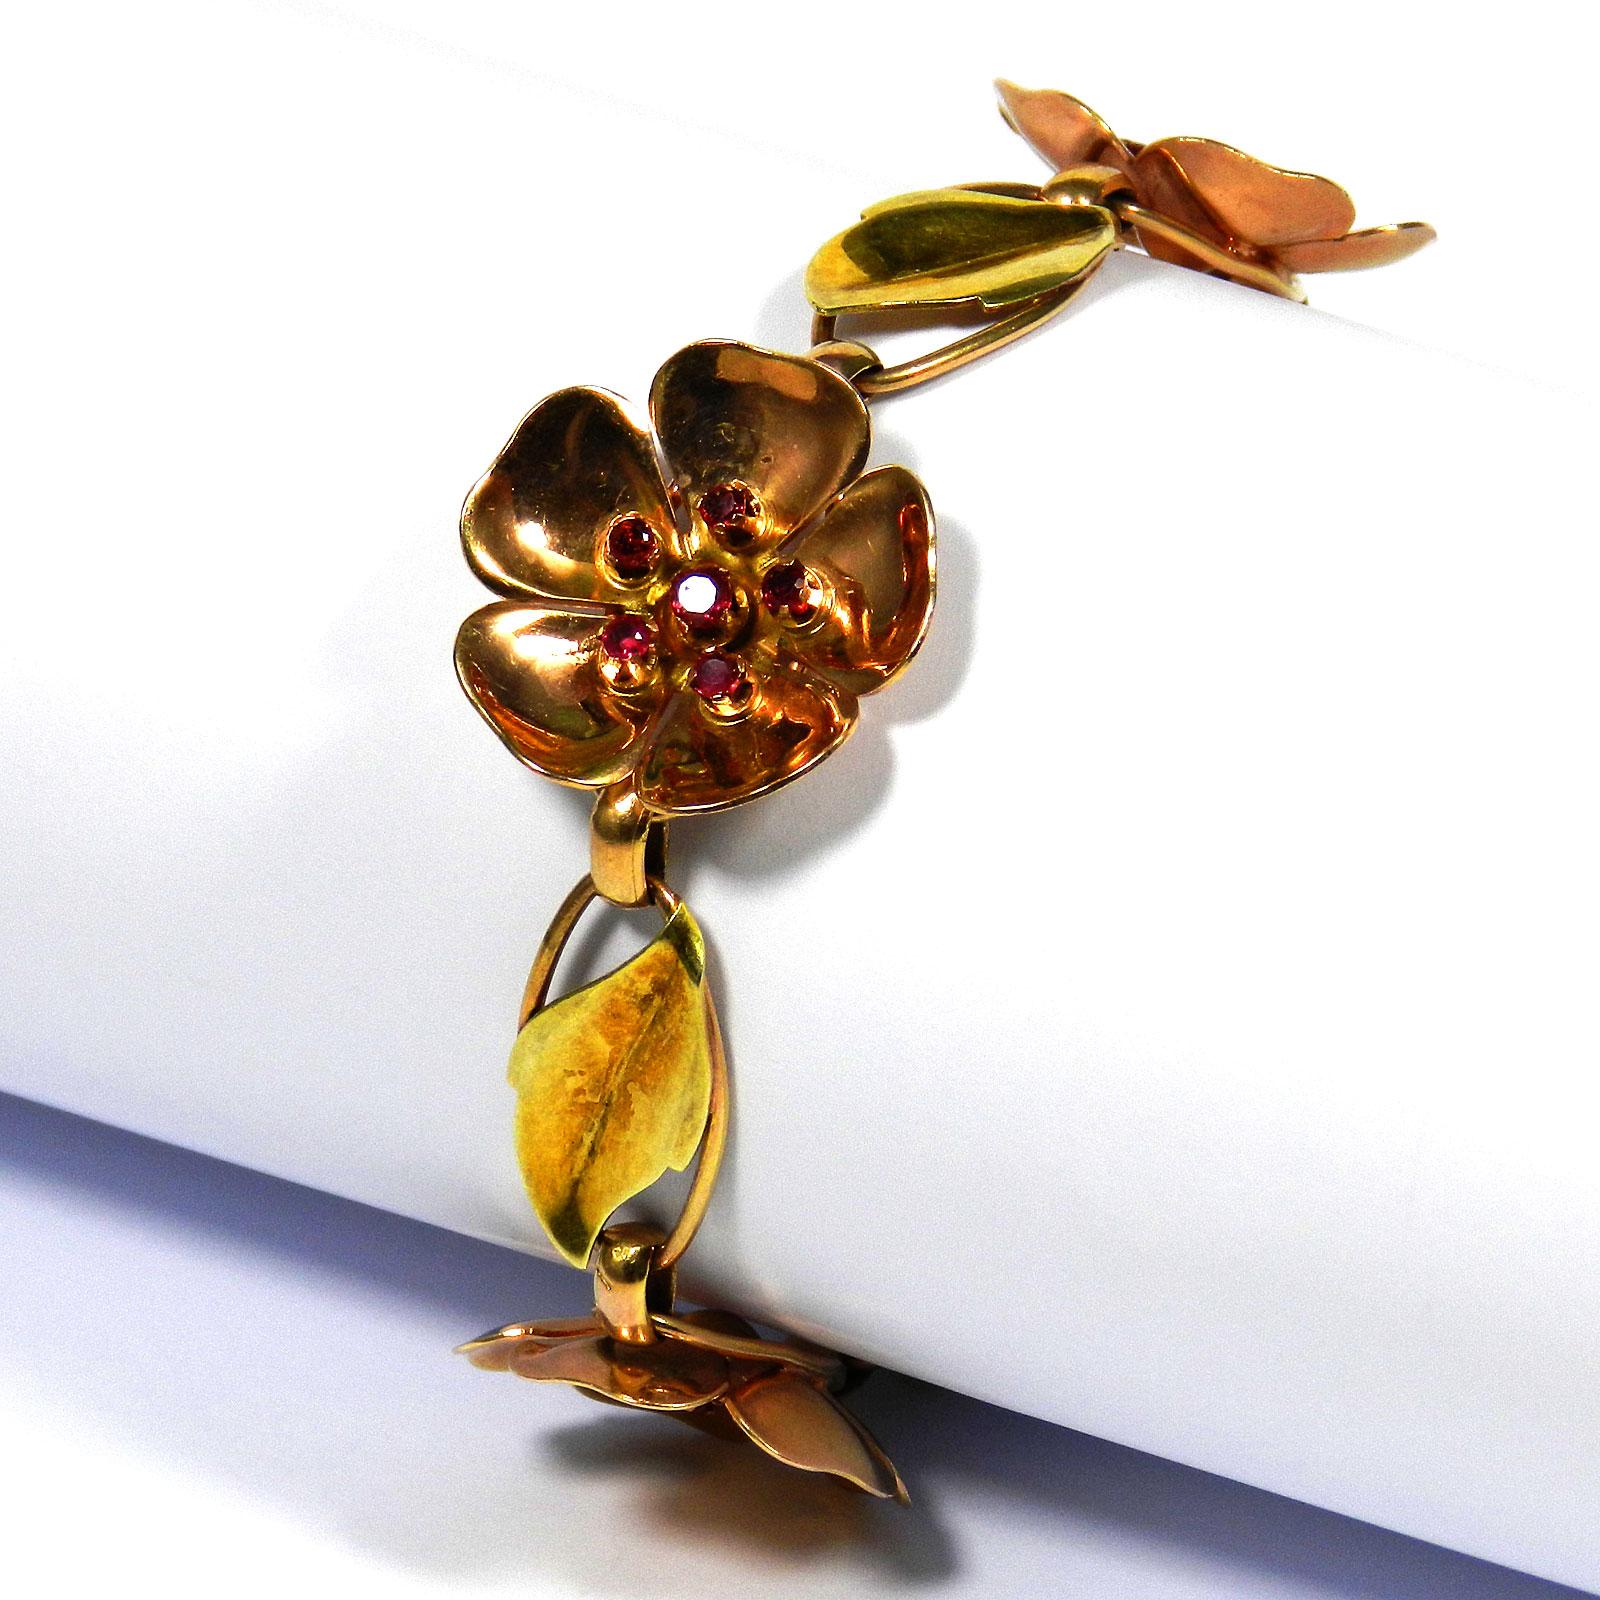 Walter Lampl Retro 14 K gold ruby flower bracelet, circa 1940

A rare two-tone Retro flower bracelet from New York's jewelry designer Walter Lampl. 
Its design comprises three rose gold blossoms set with rubies, which alternate with oval links,